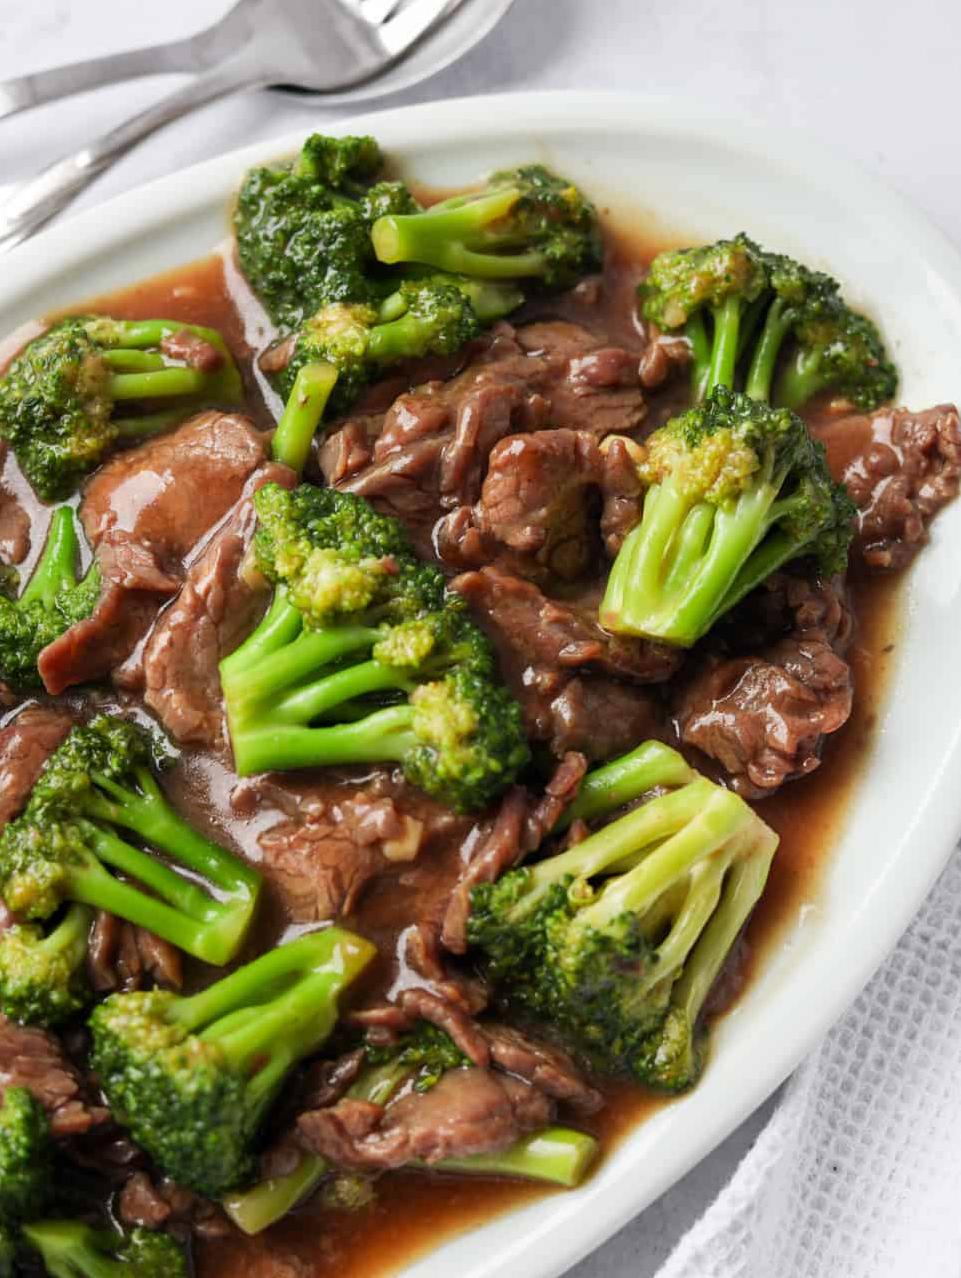  An inviting bowl of Beef and Broccoli in a Savory Wine Sauce!